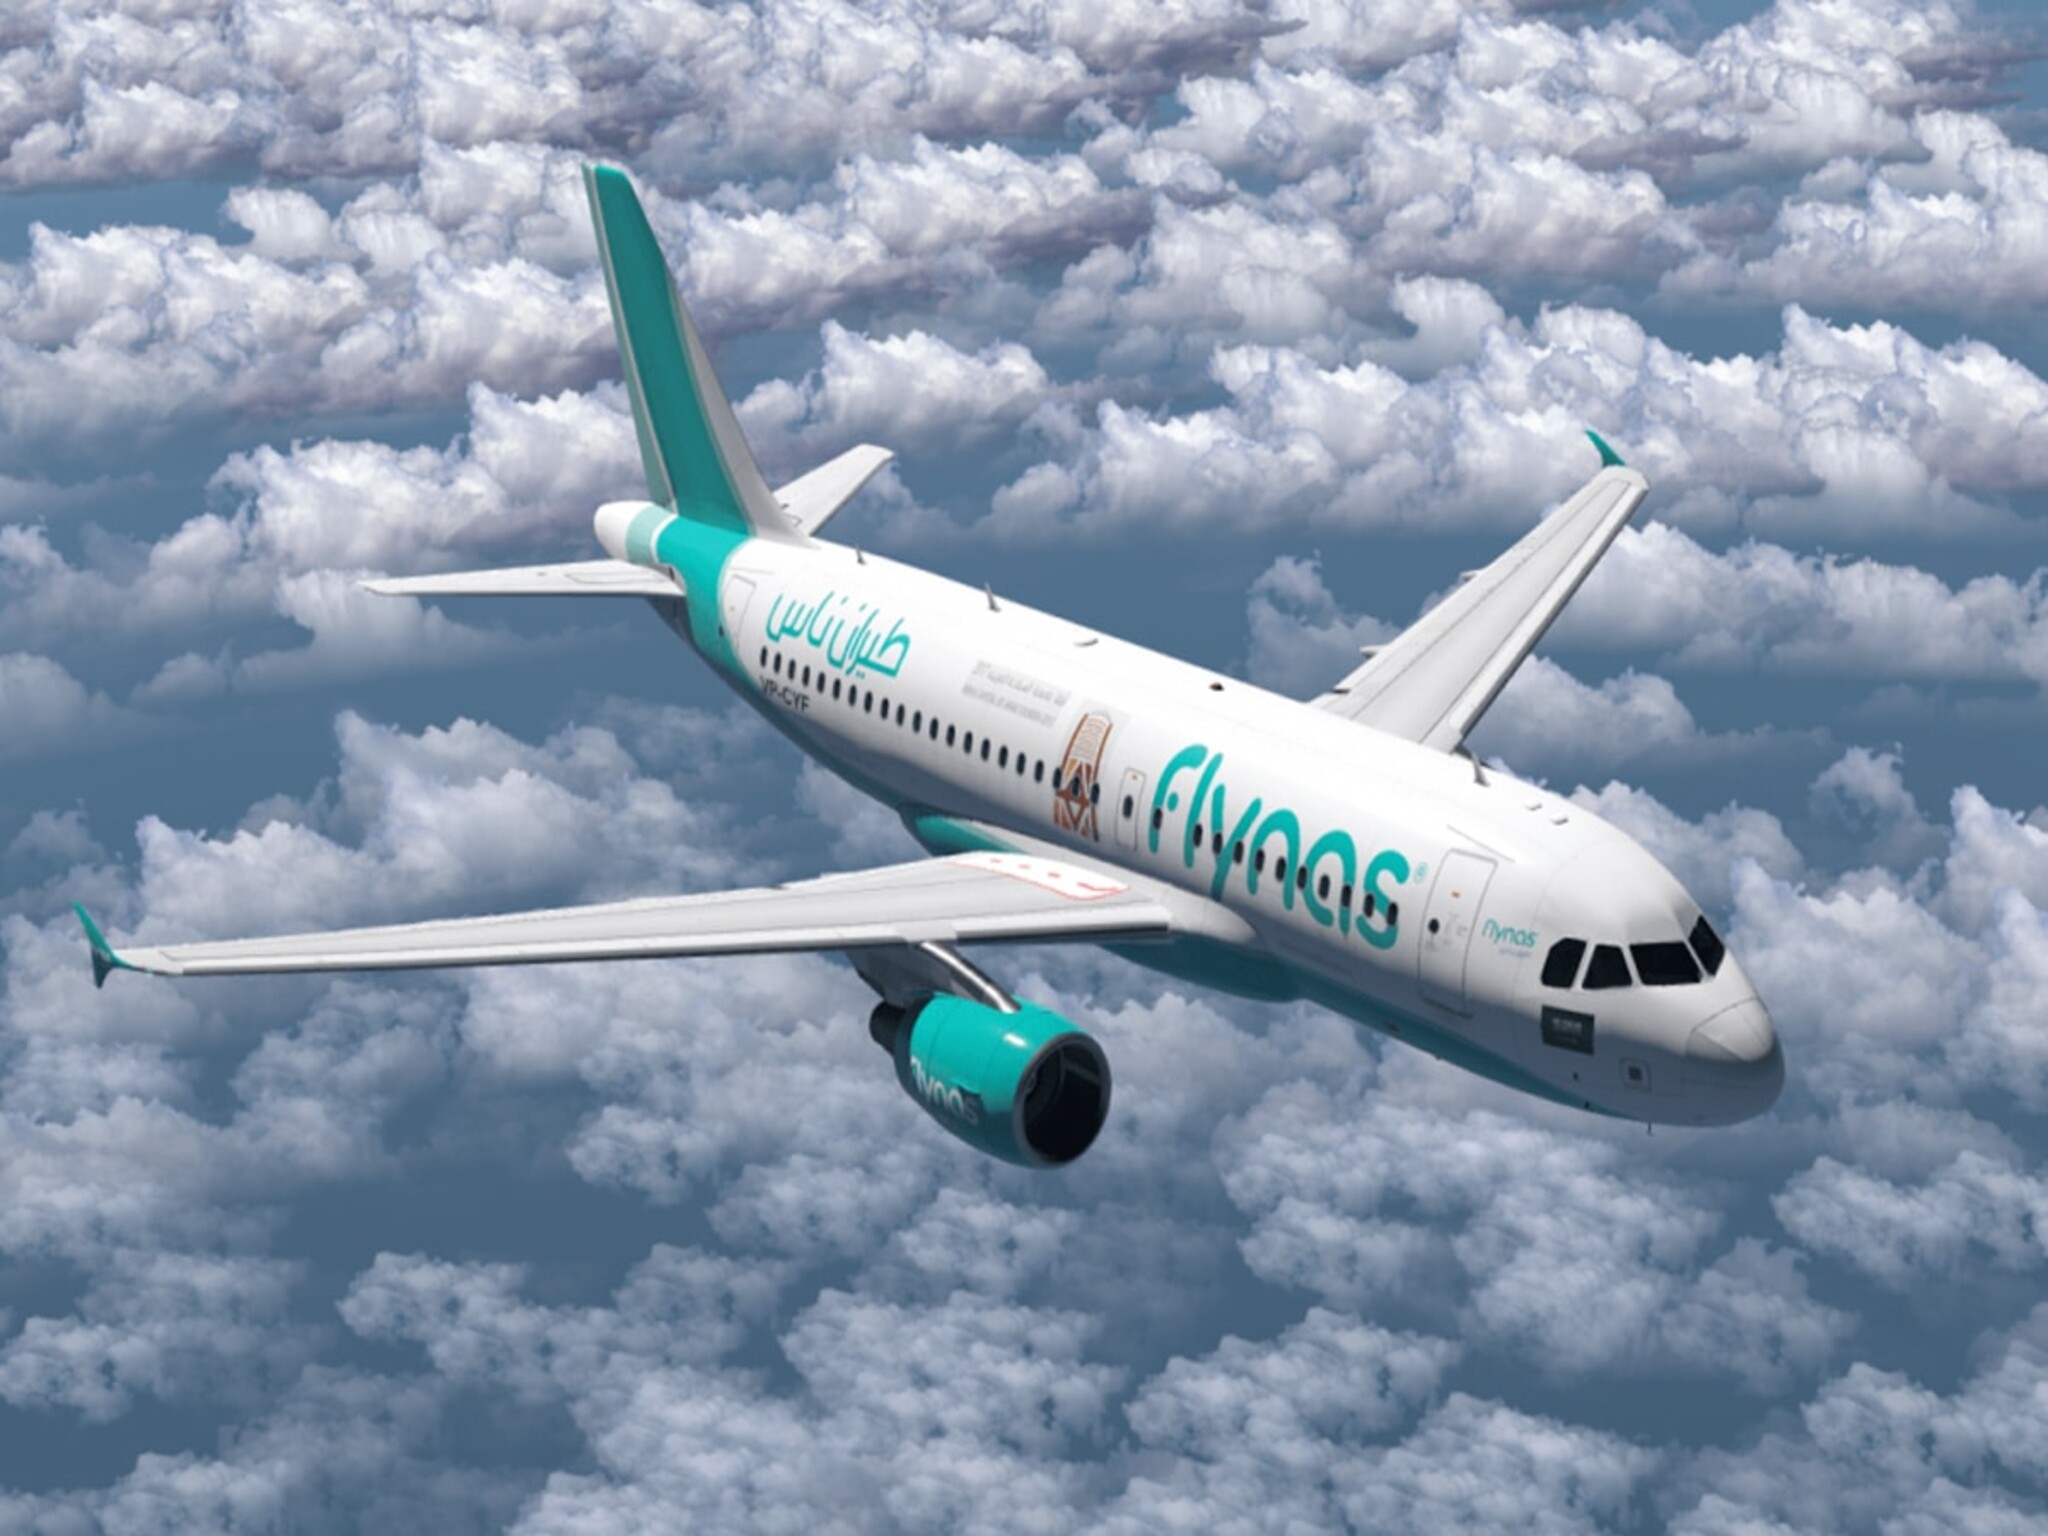 Flynas CEO sets plans for IPO and purchase of 30 widebodies amid expansion